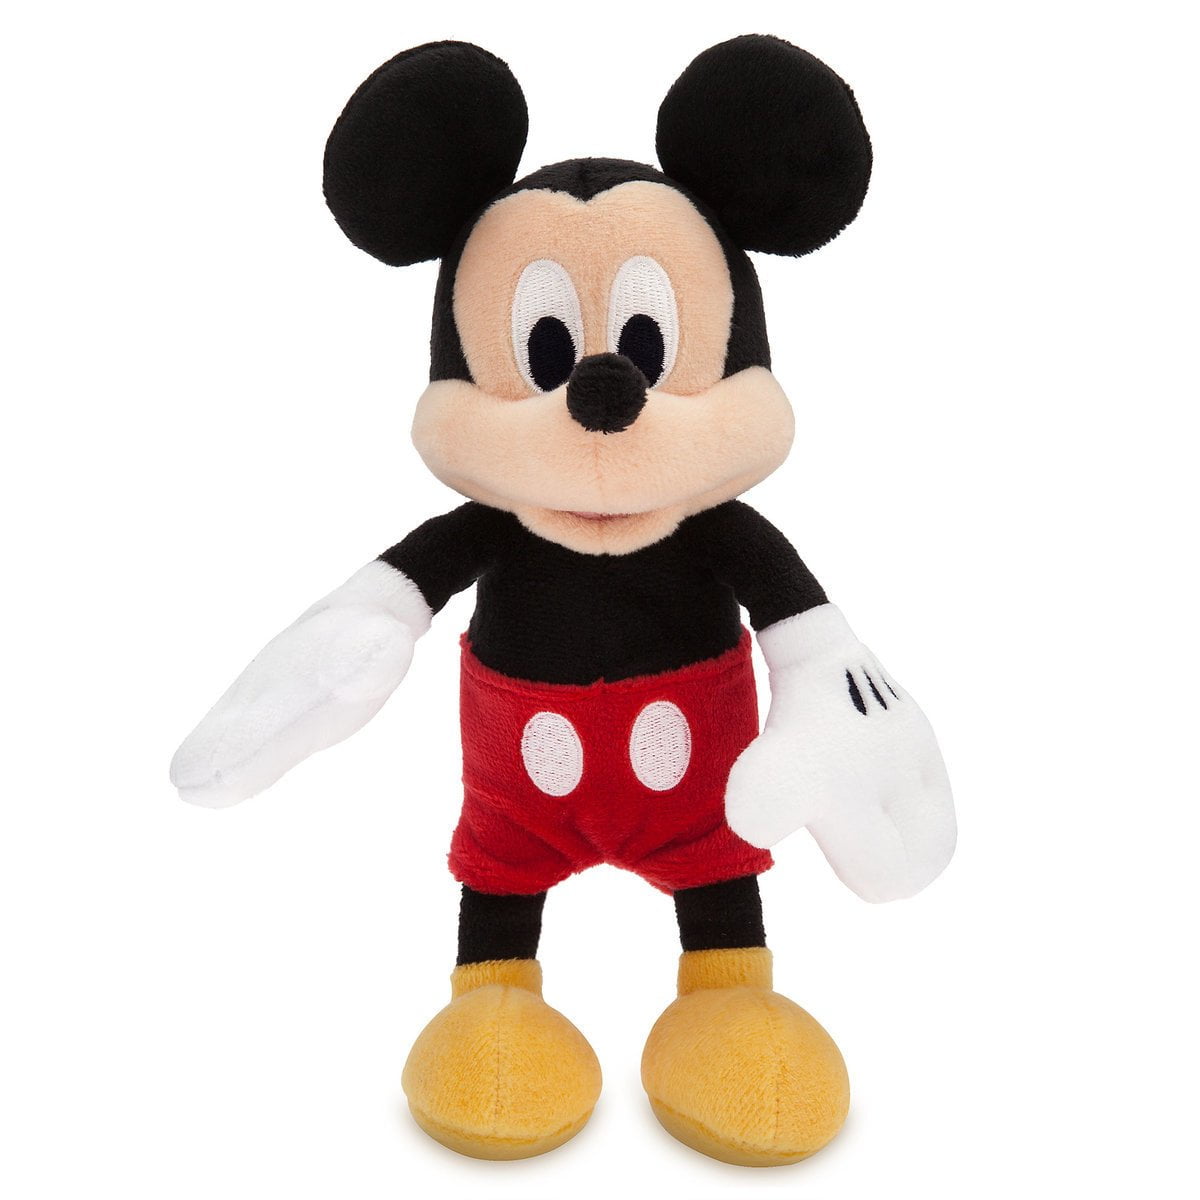 Details about   NEW Disney Store SUGAR PLUM MINNIE BEANBAG Plush Toy Mouse MWMT FREE Shipping 